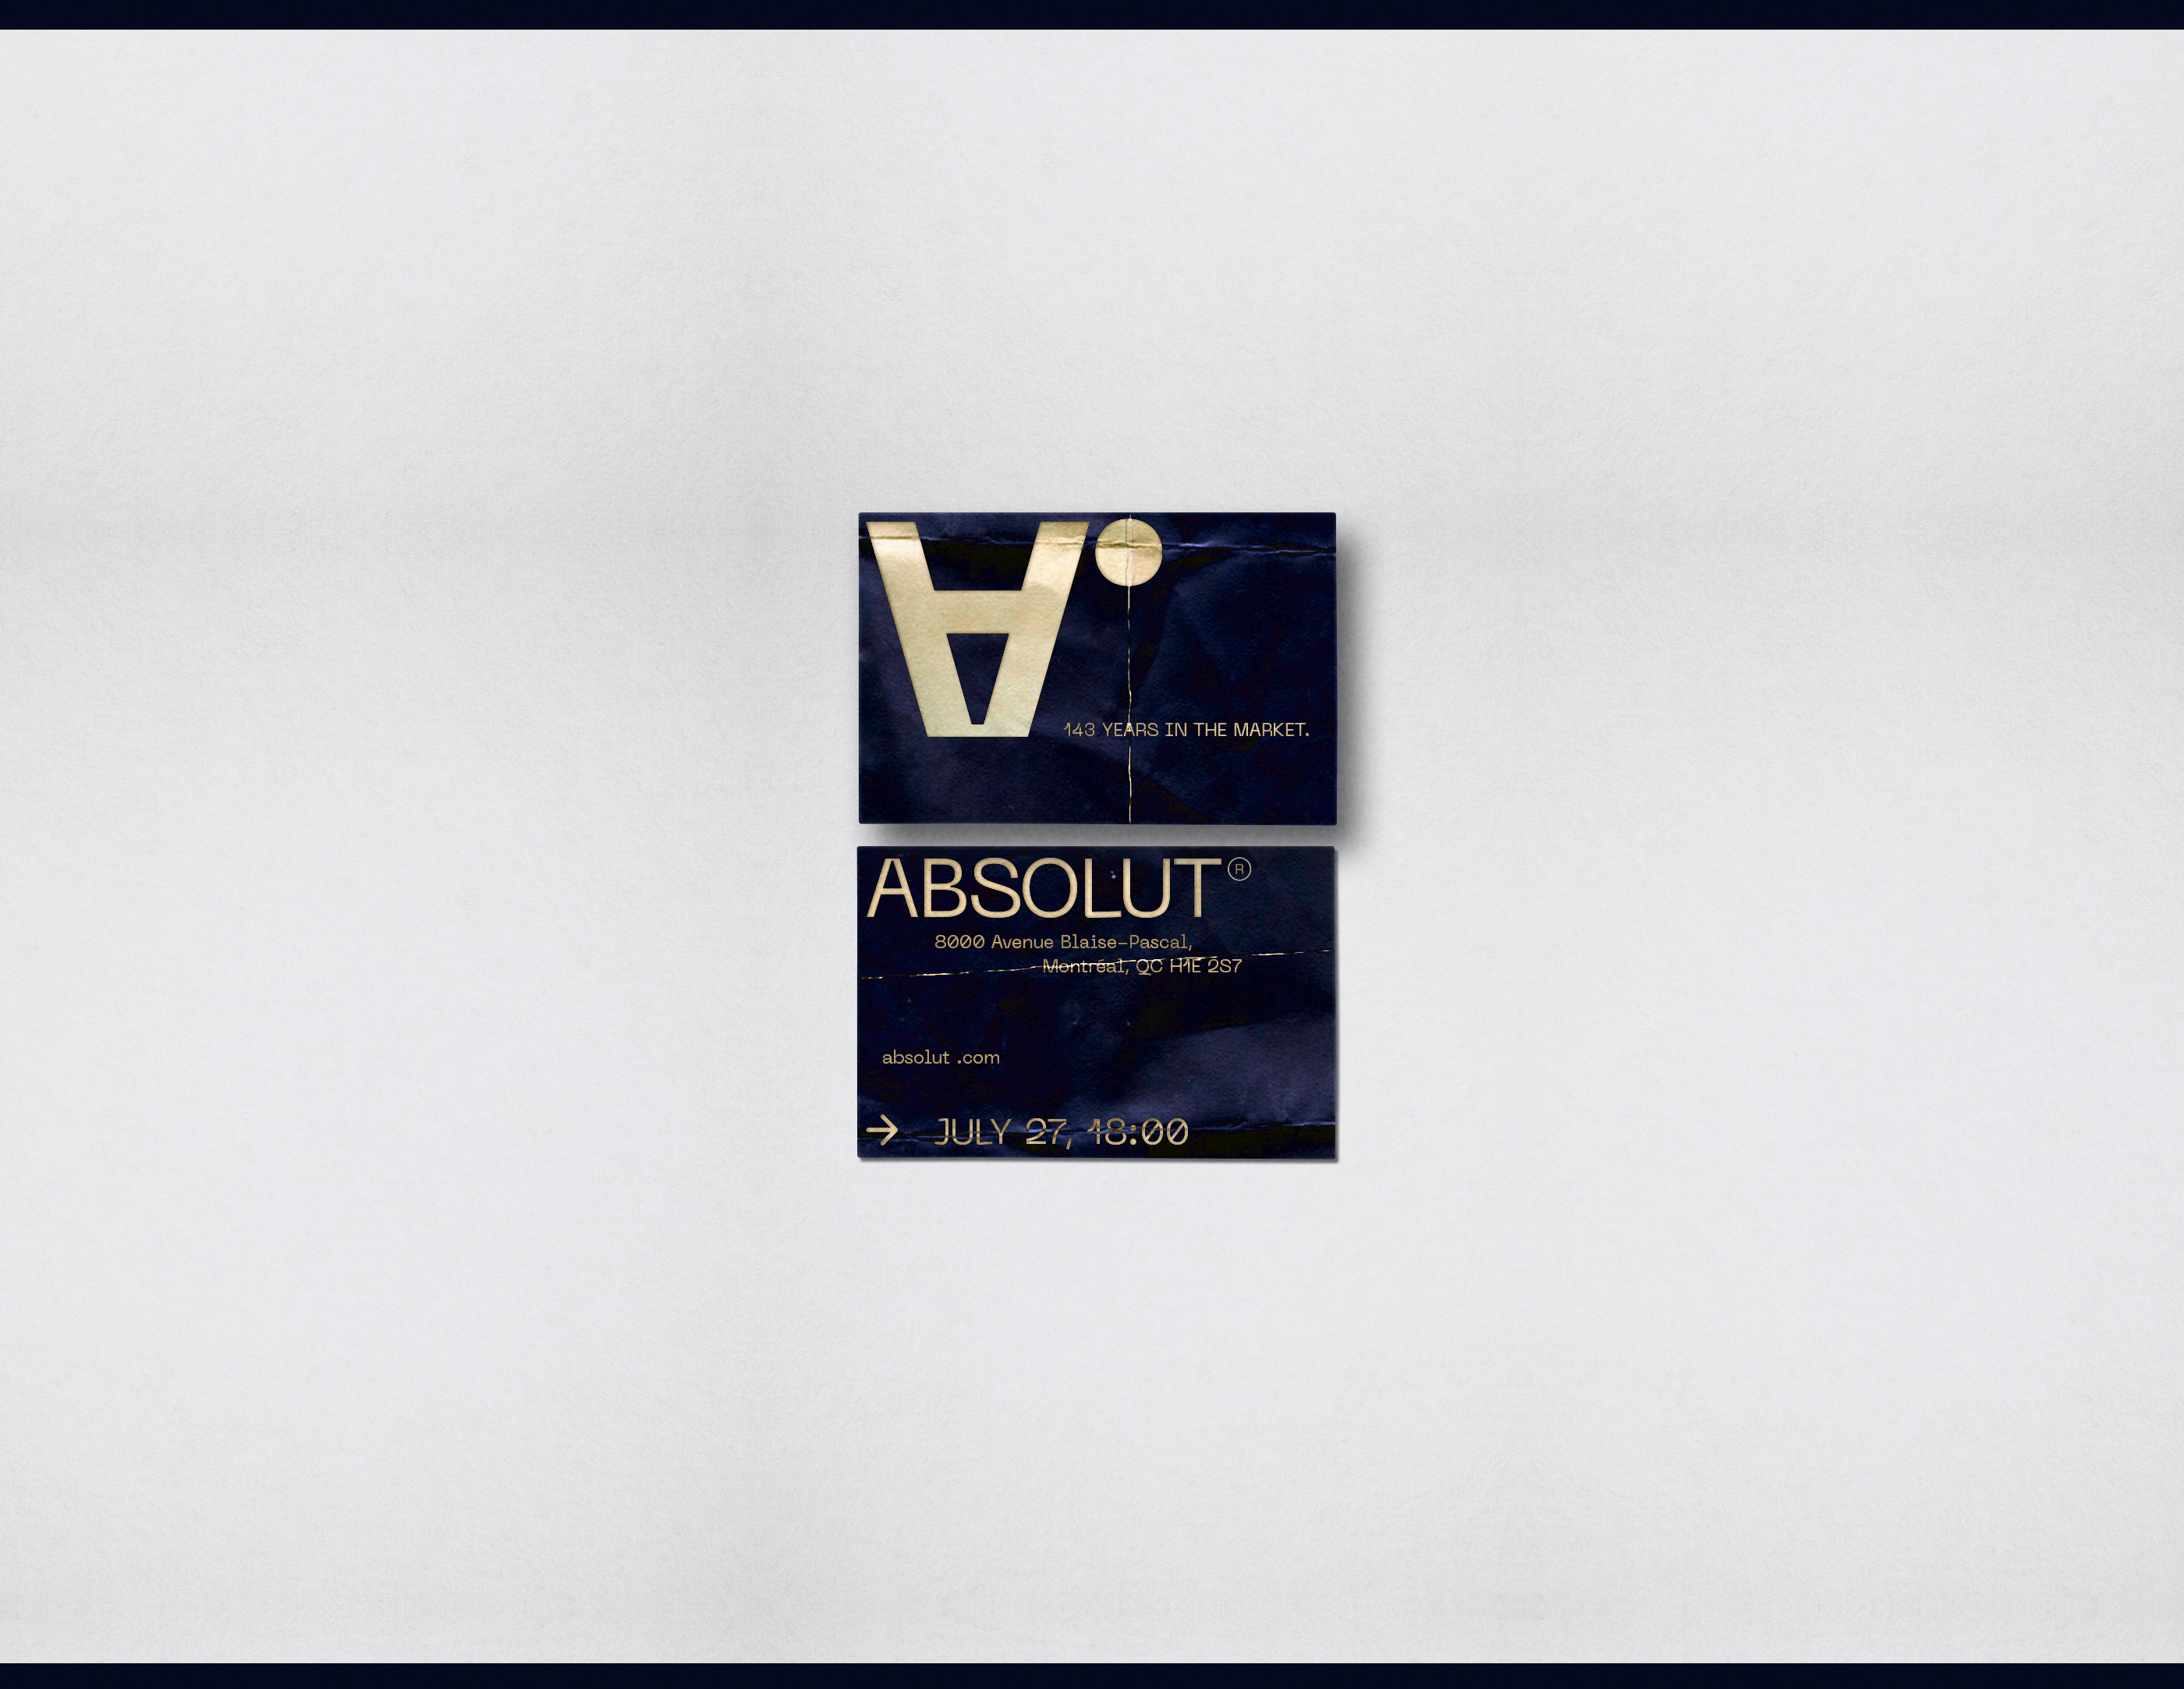 The current work includes print materials for the Vodka Absolut 143 event.